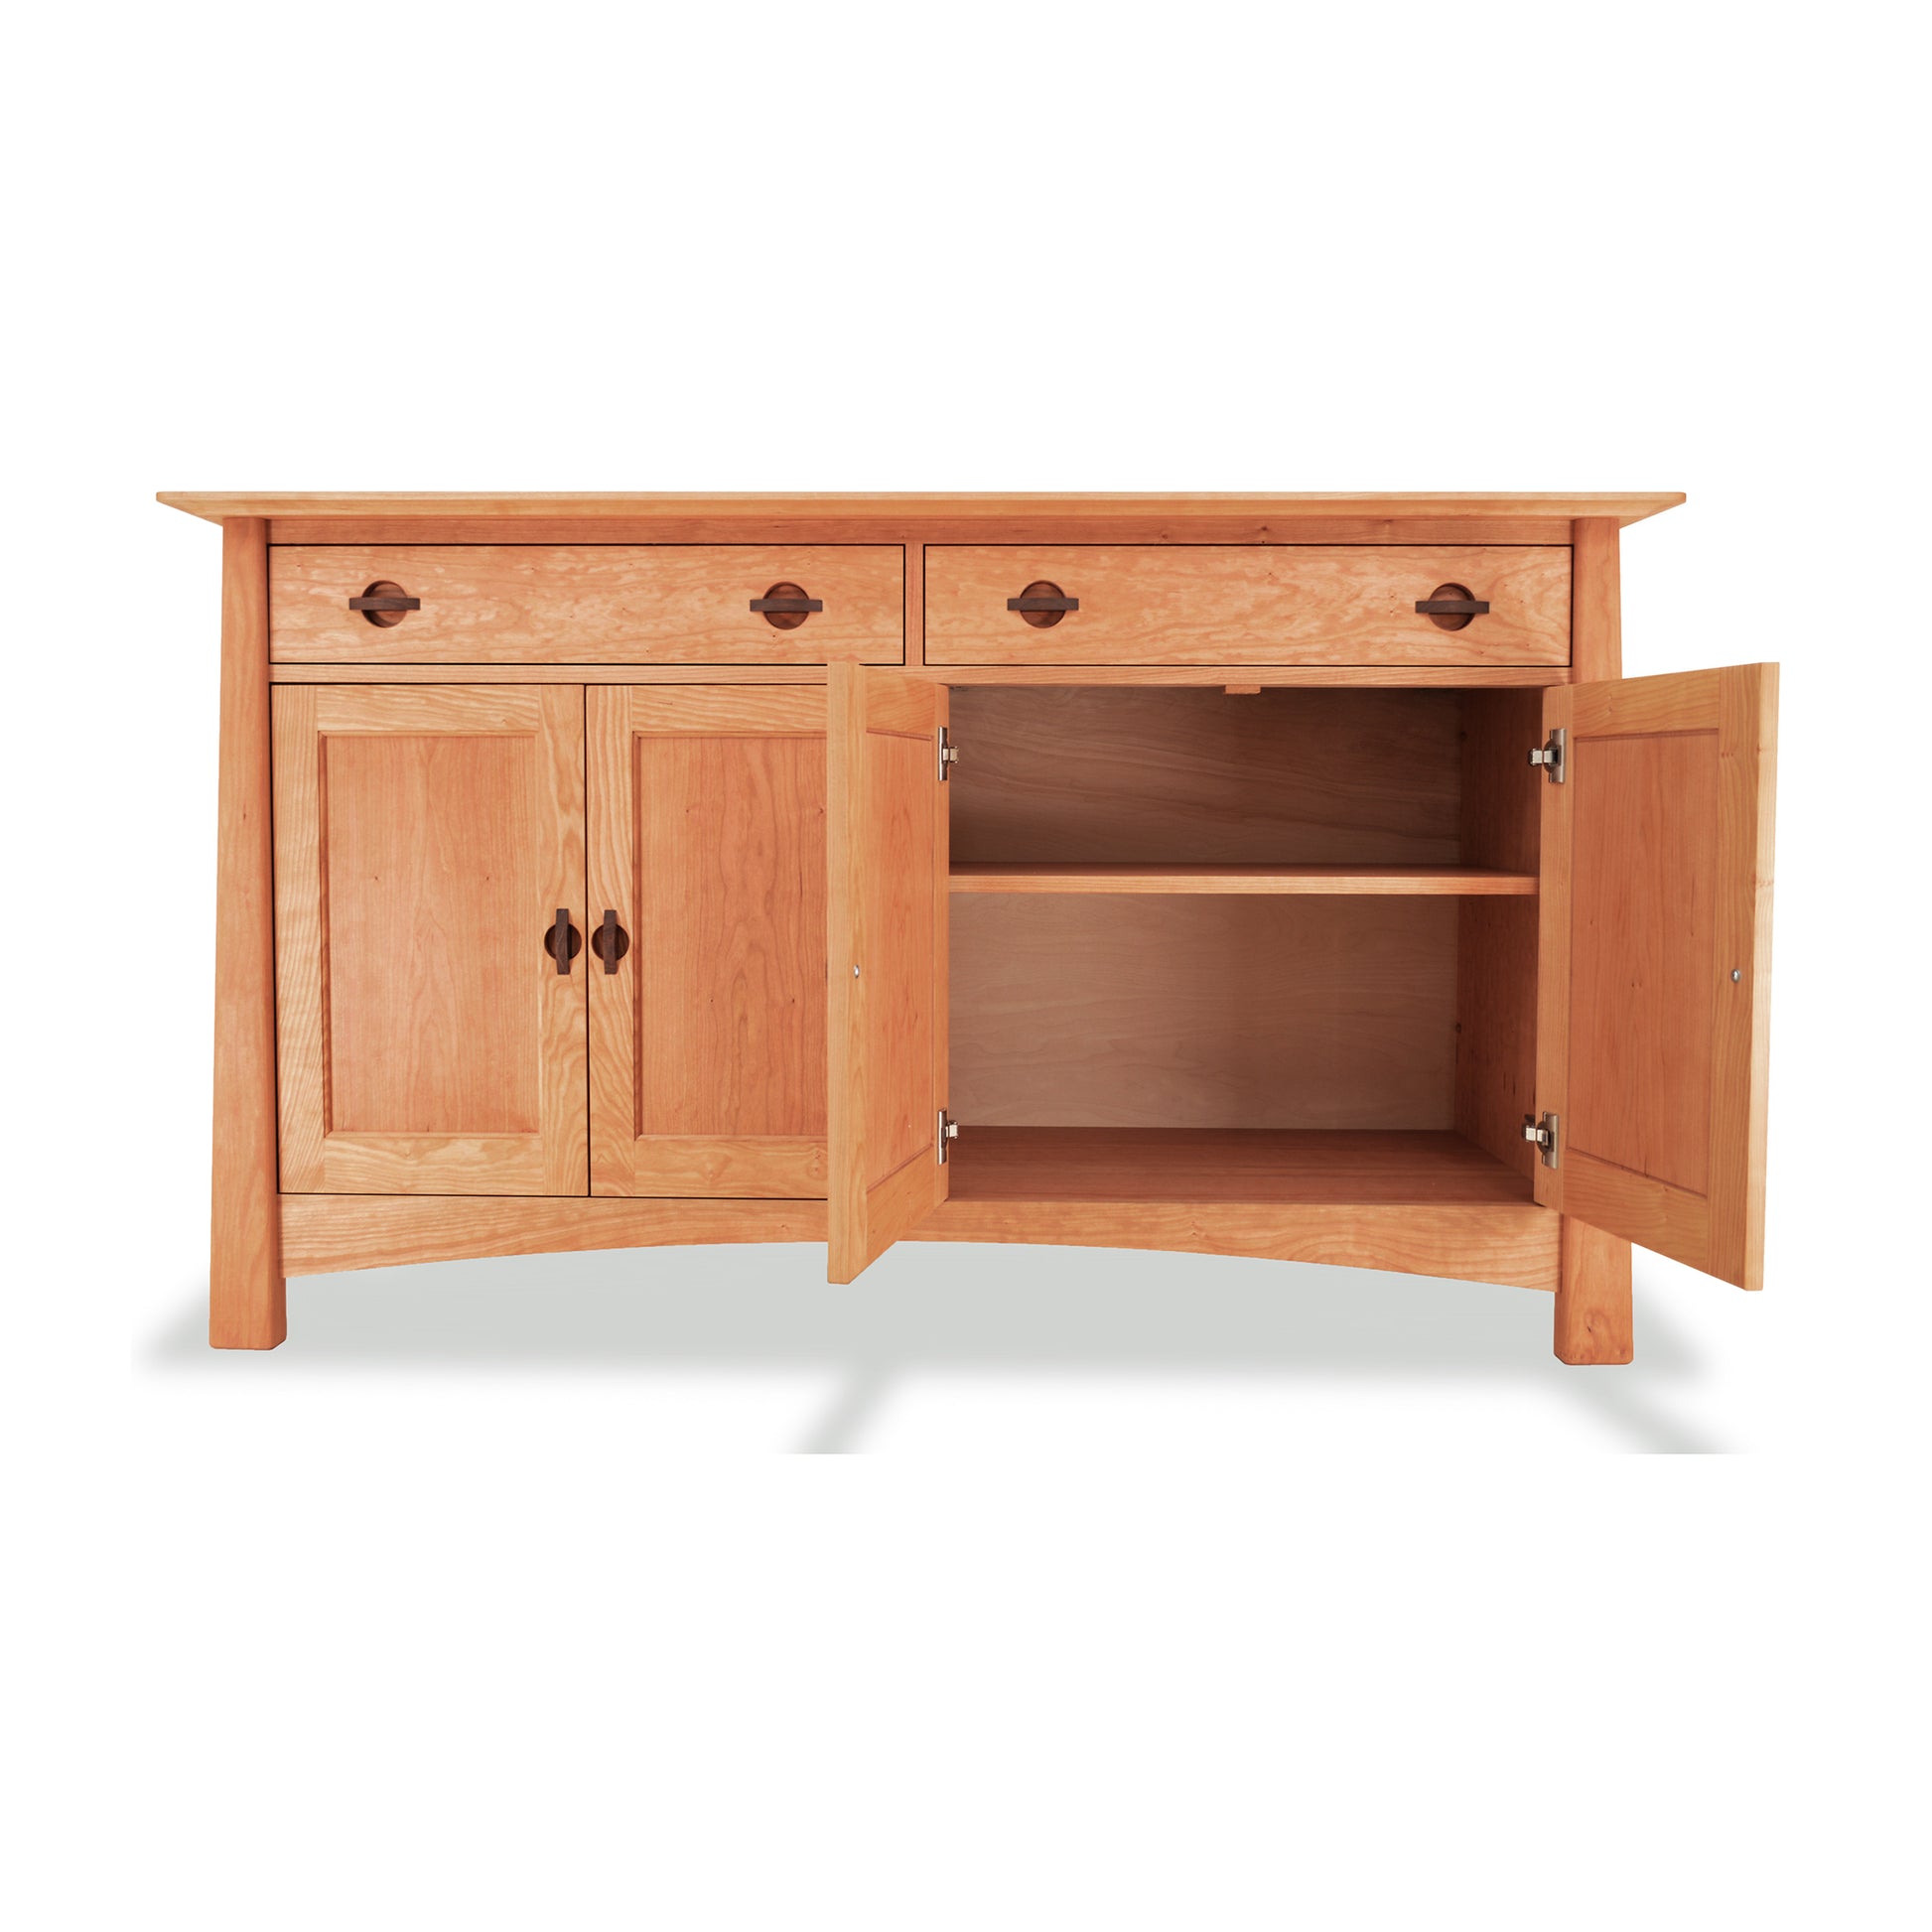 A Cherry Moon Large Sideboard by Maple Corner Woodworks with an eco-friendly oil finish, featuring an open central storage compartment, flanked by two closed cabinets, and three small drawers above the cabinets, all against a white background.